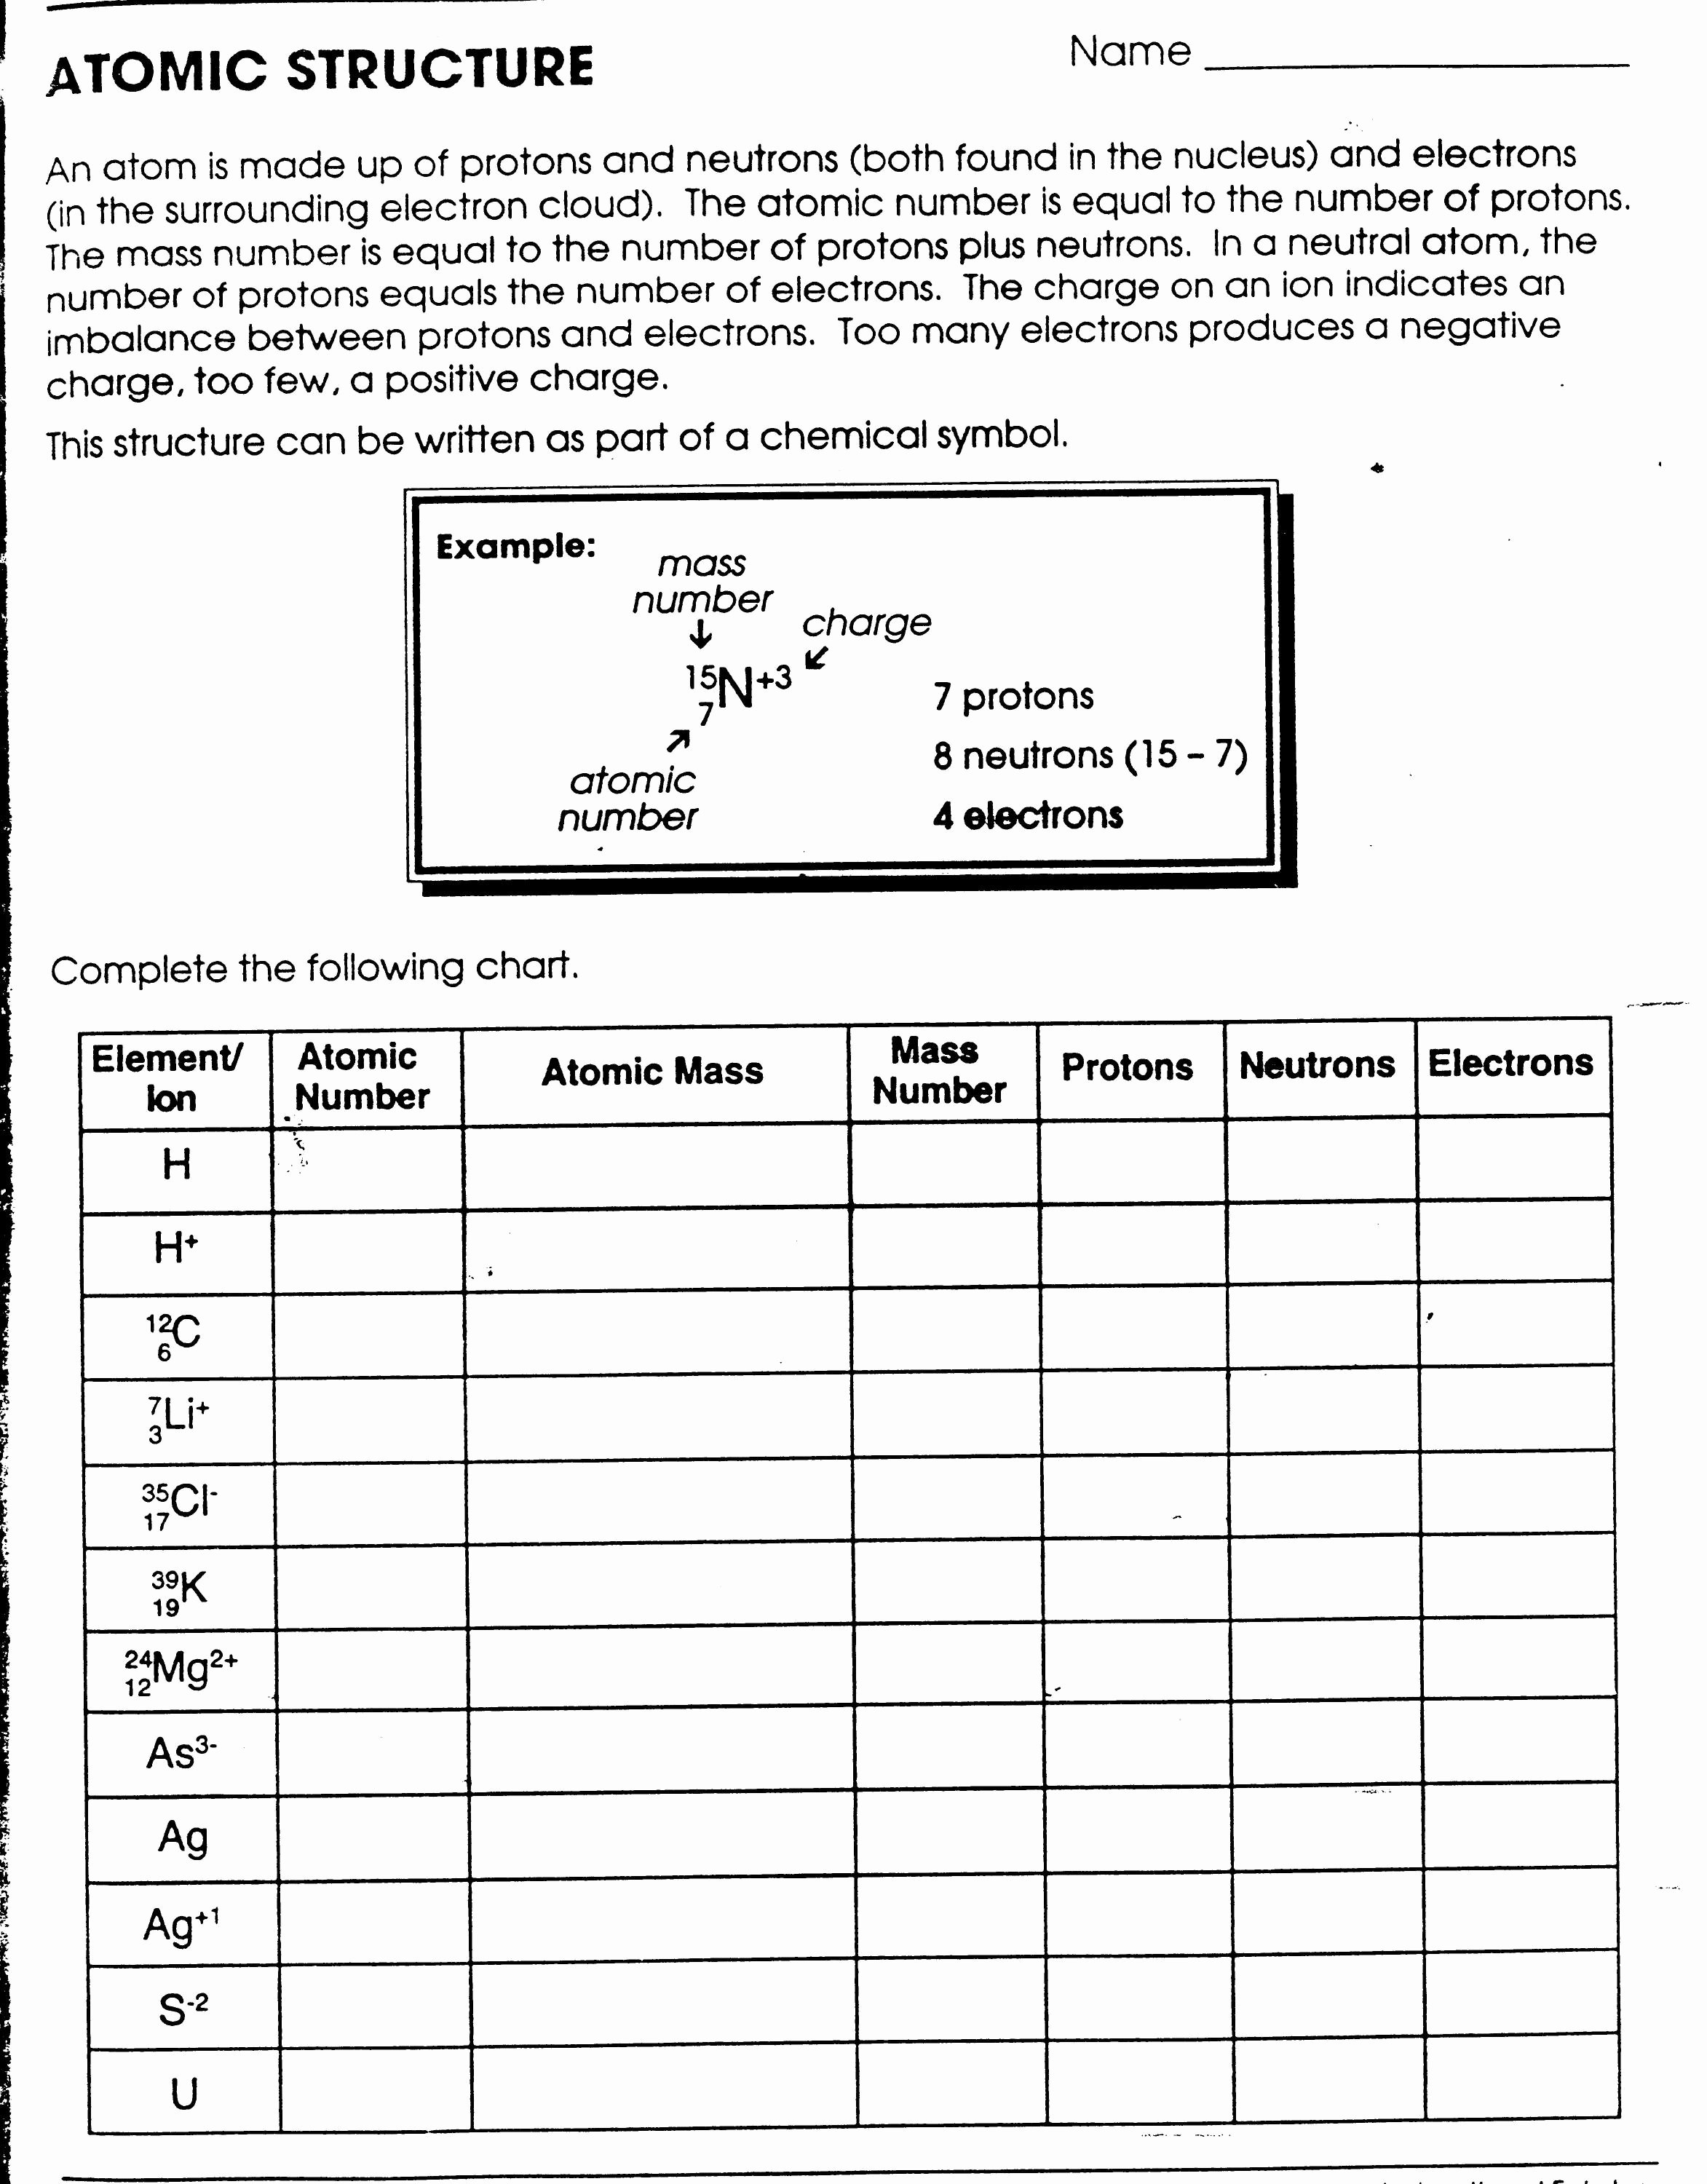 Drawing atoms Worksheet Answer Key Best Of 12 Best Of atomic Structure Diagram Worksheet